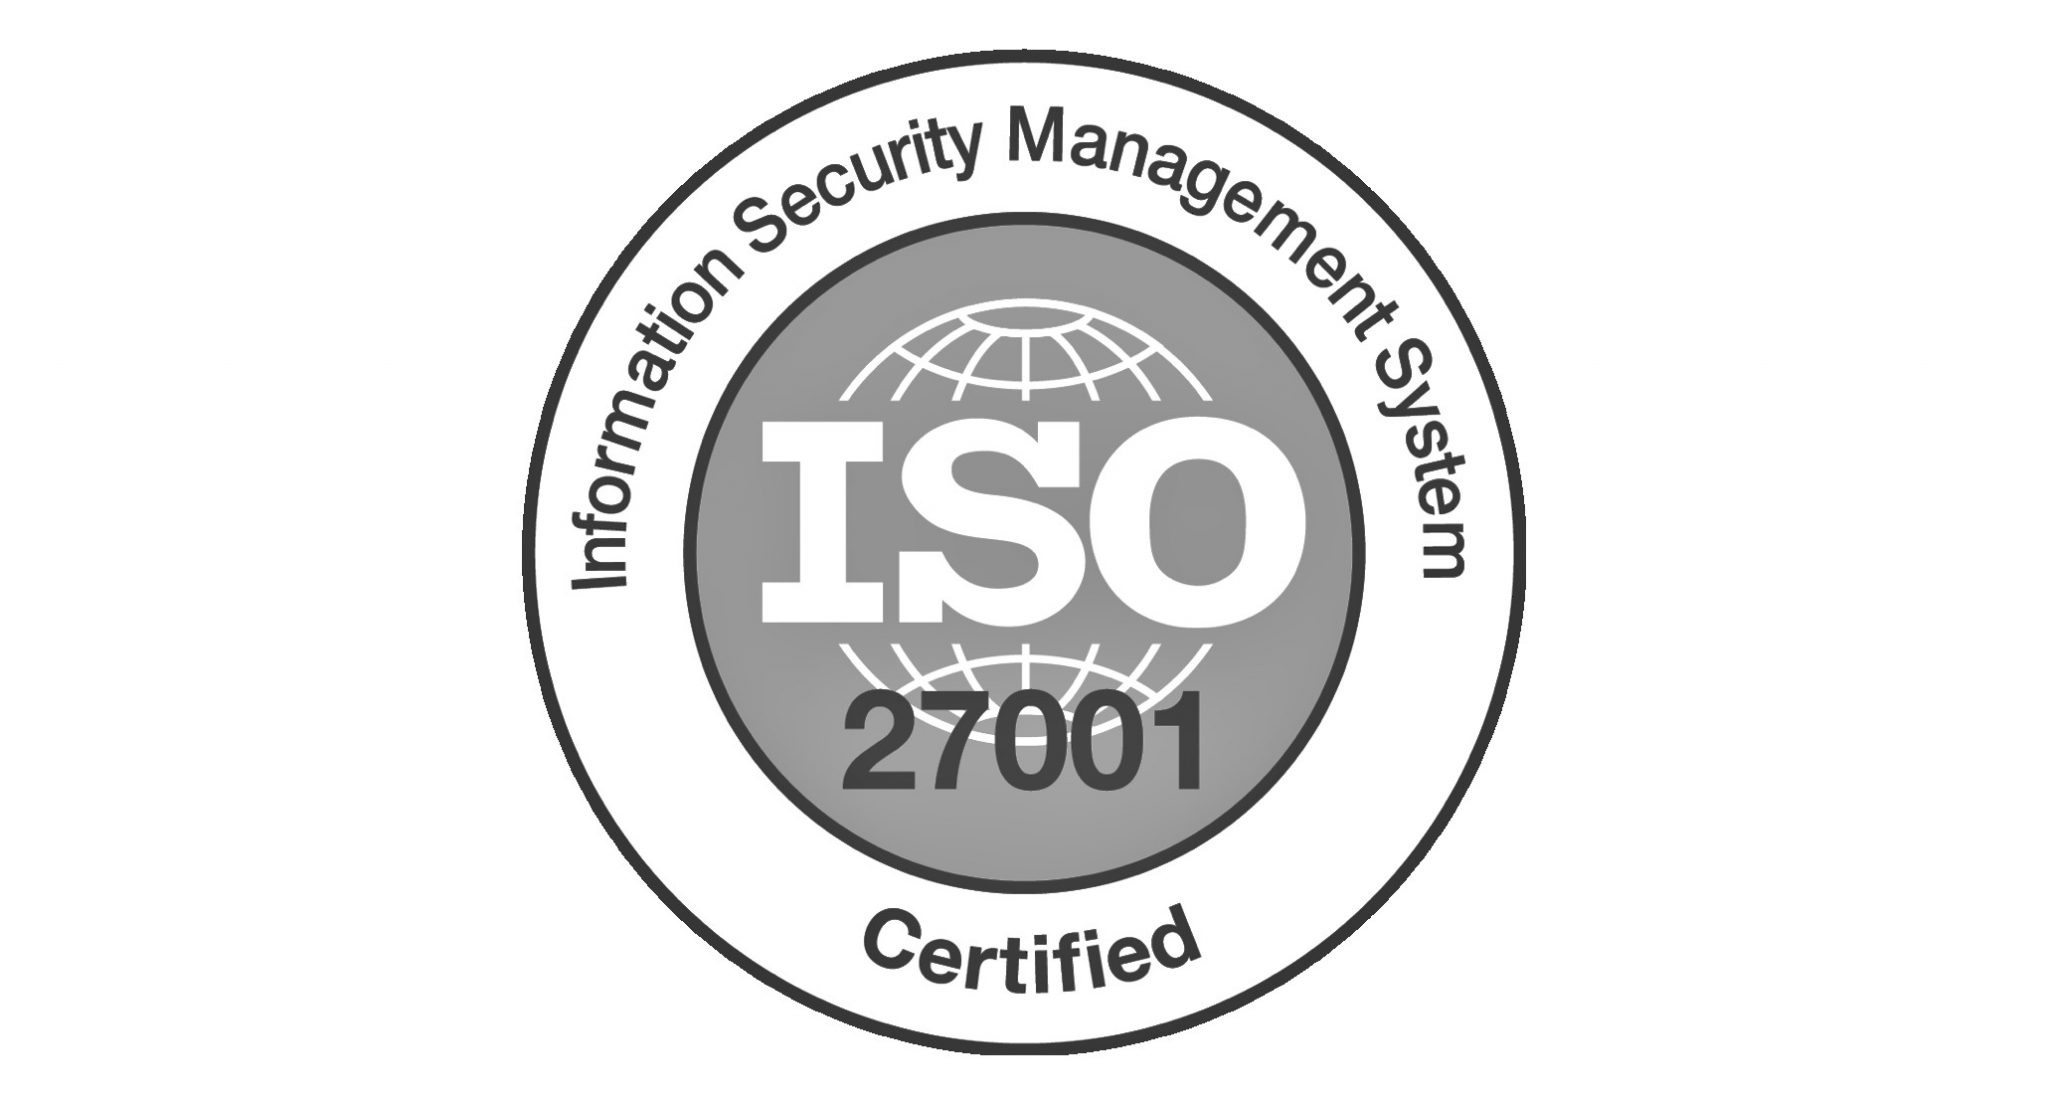 Cloud9 Achieves ISO 27001 Certification